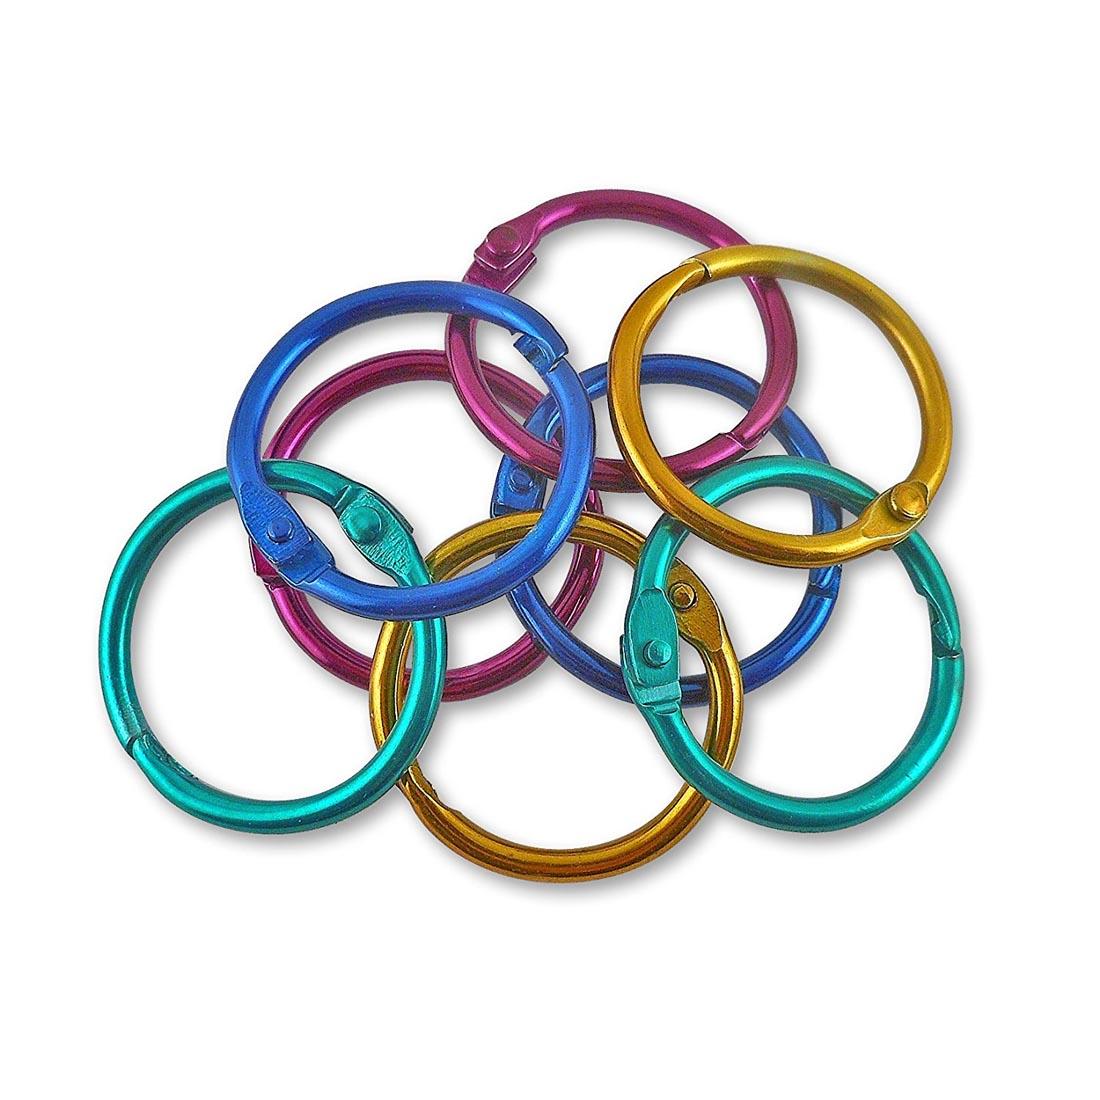 A pile of Colored Book Rings